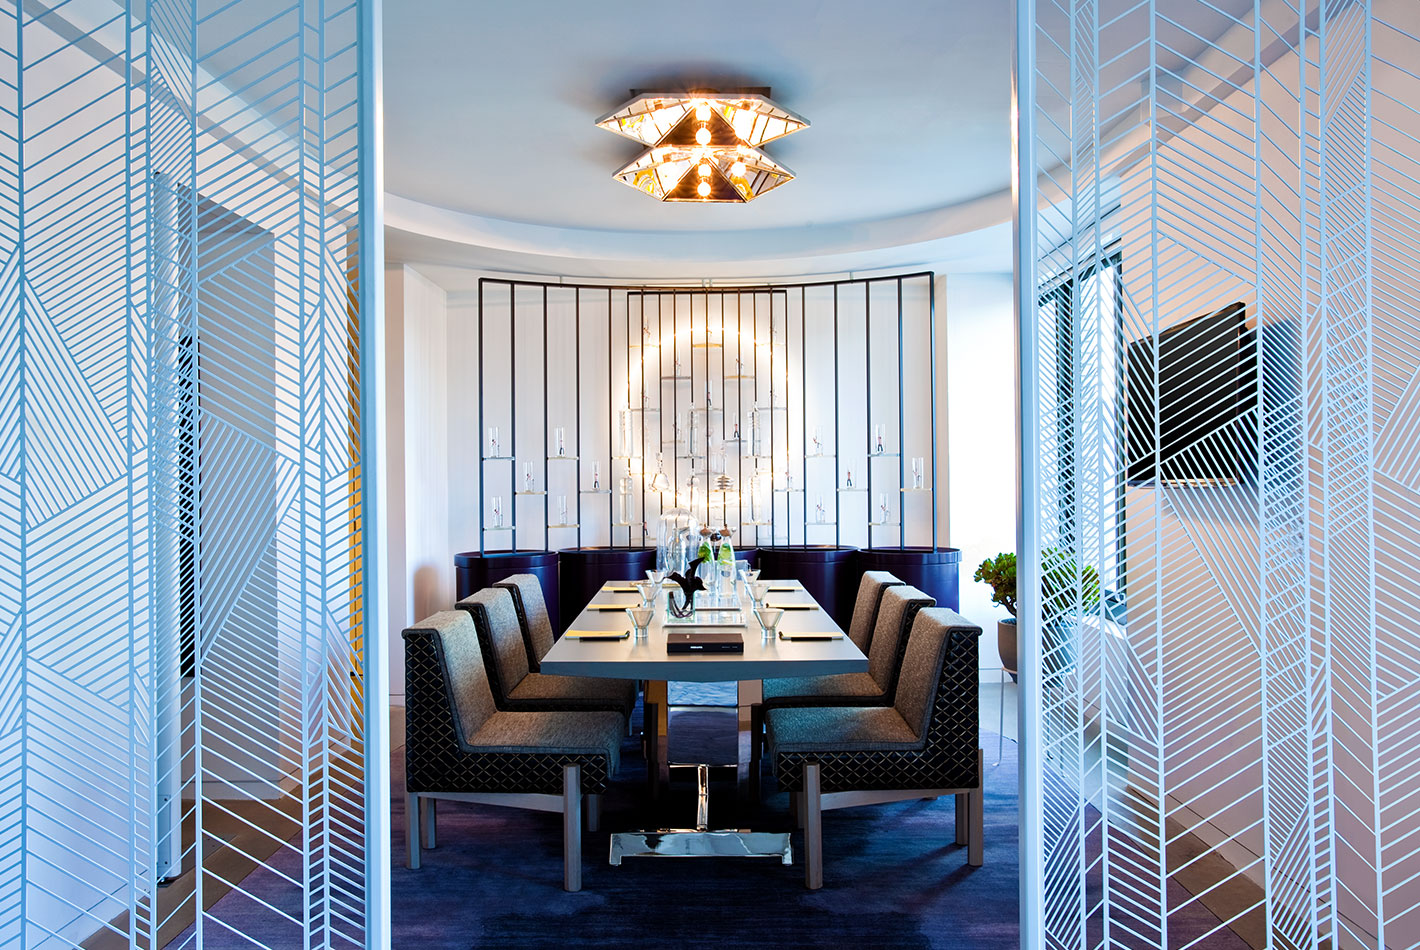 A gleaming white dining room features a table set for 6. Geometric-patterned wall panels separate the space from the rest of the hotel room